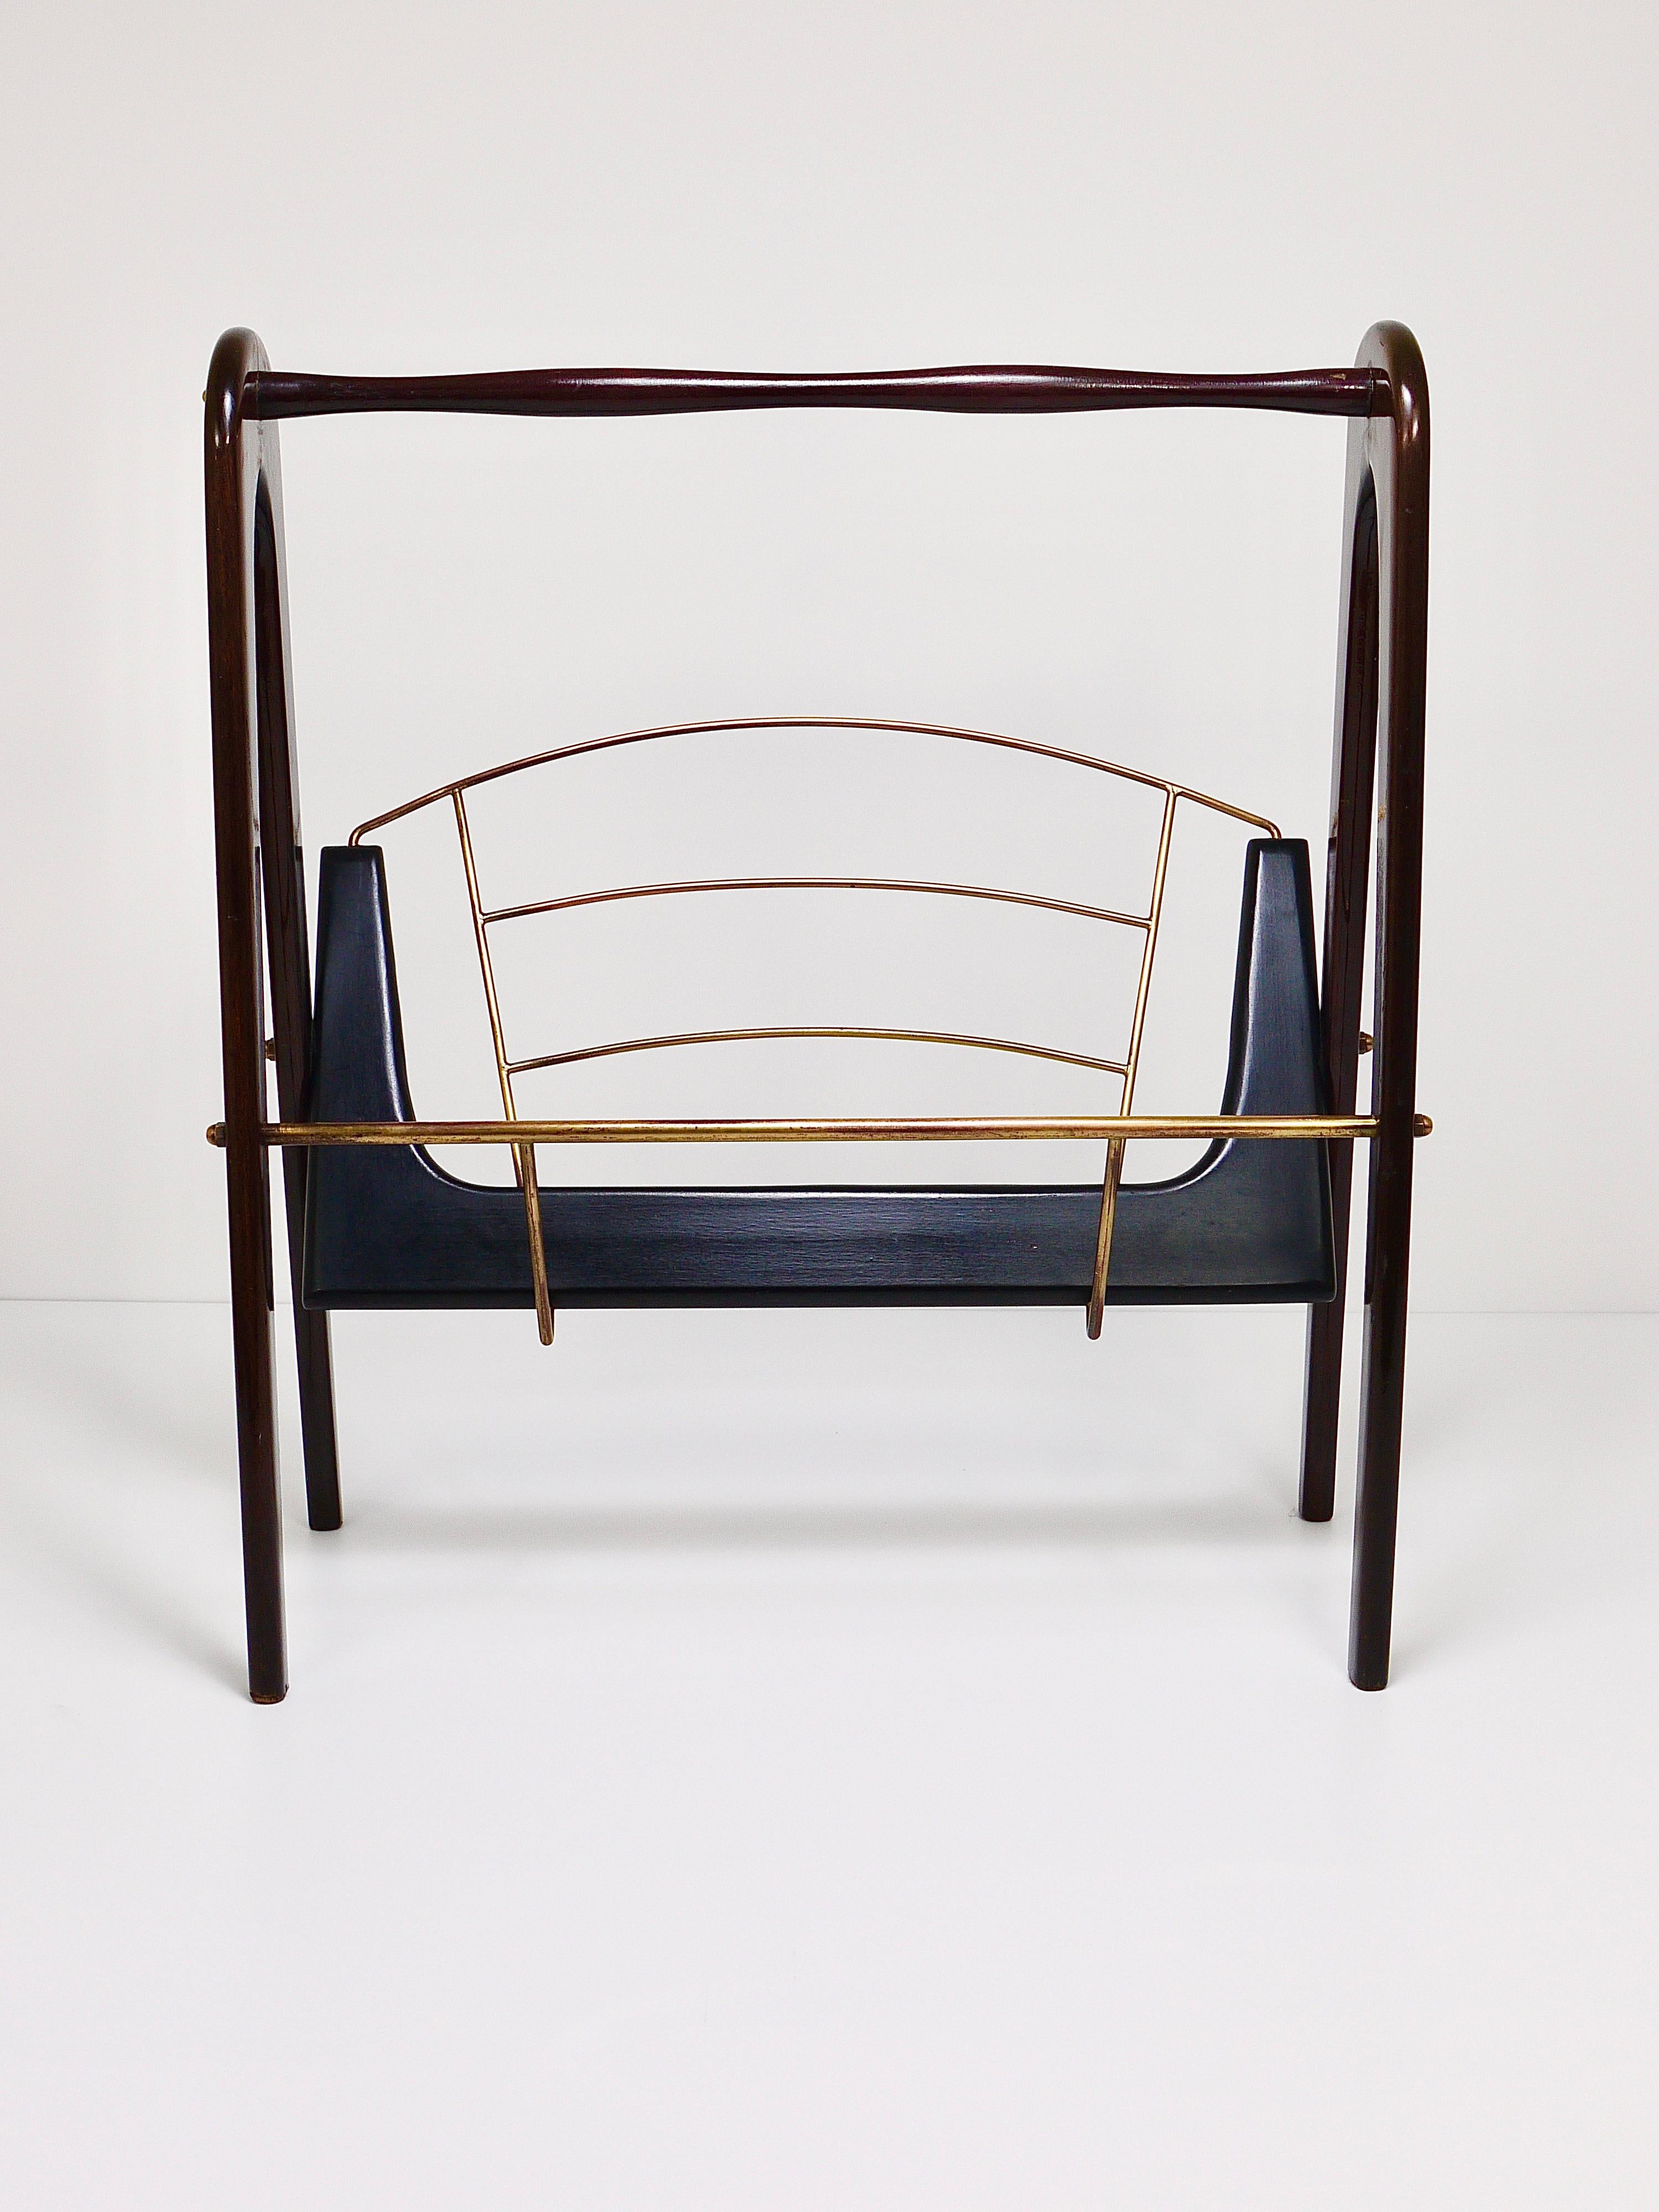 Cesare Lacca Midcentury Magazine Rack, Mahogany & Brass, Italy, 1950s For Sale 6